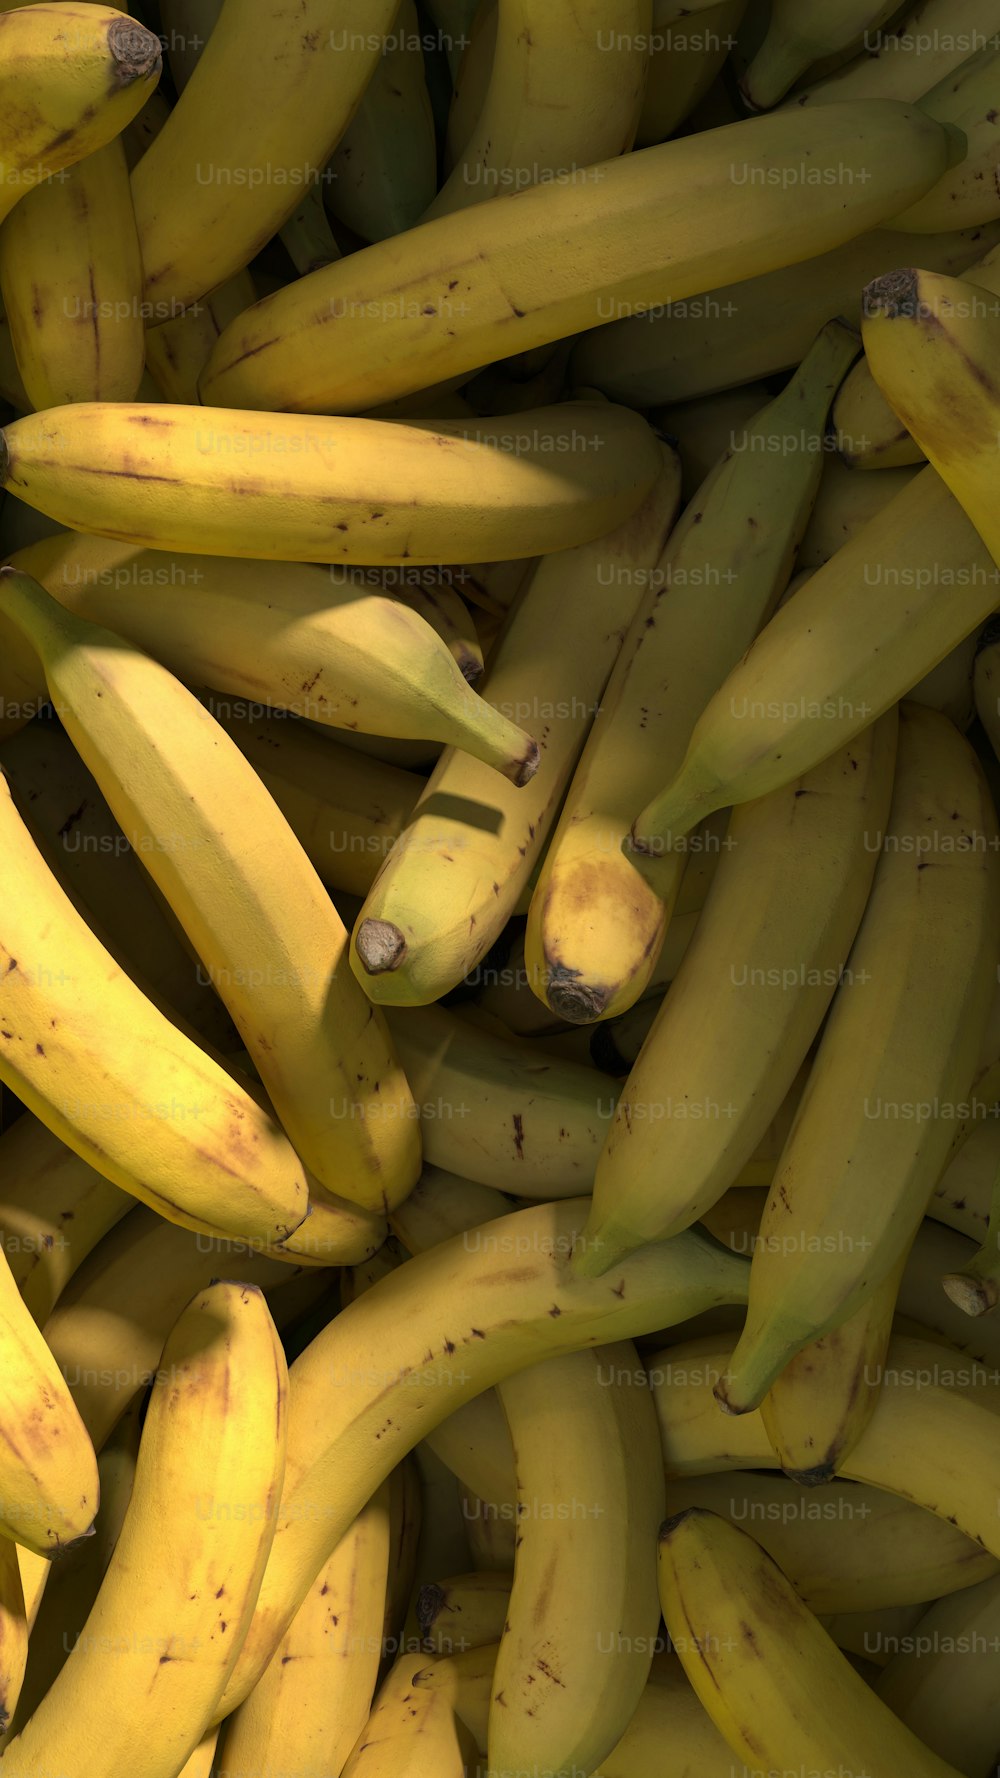 27+ Banana Pictures | Download Free Images on Unsplash